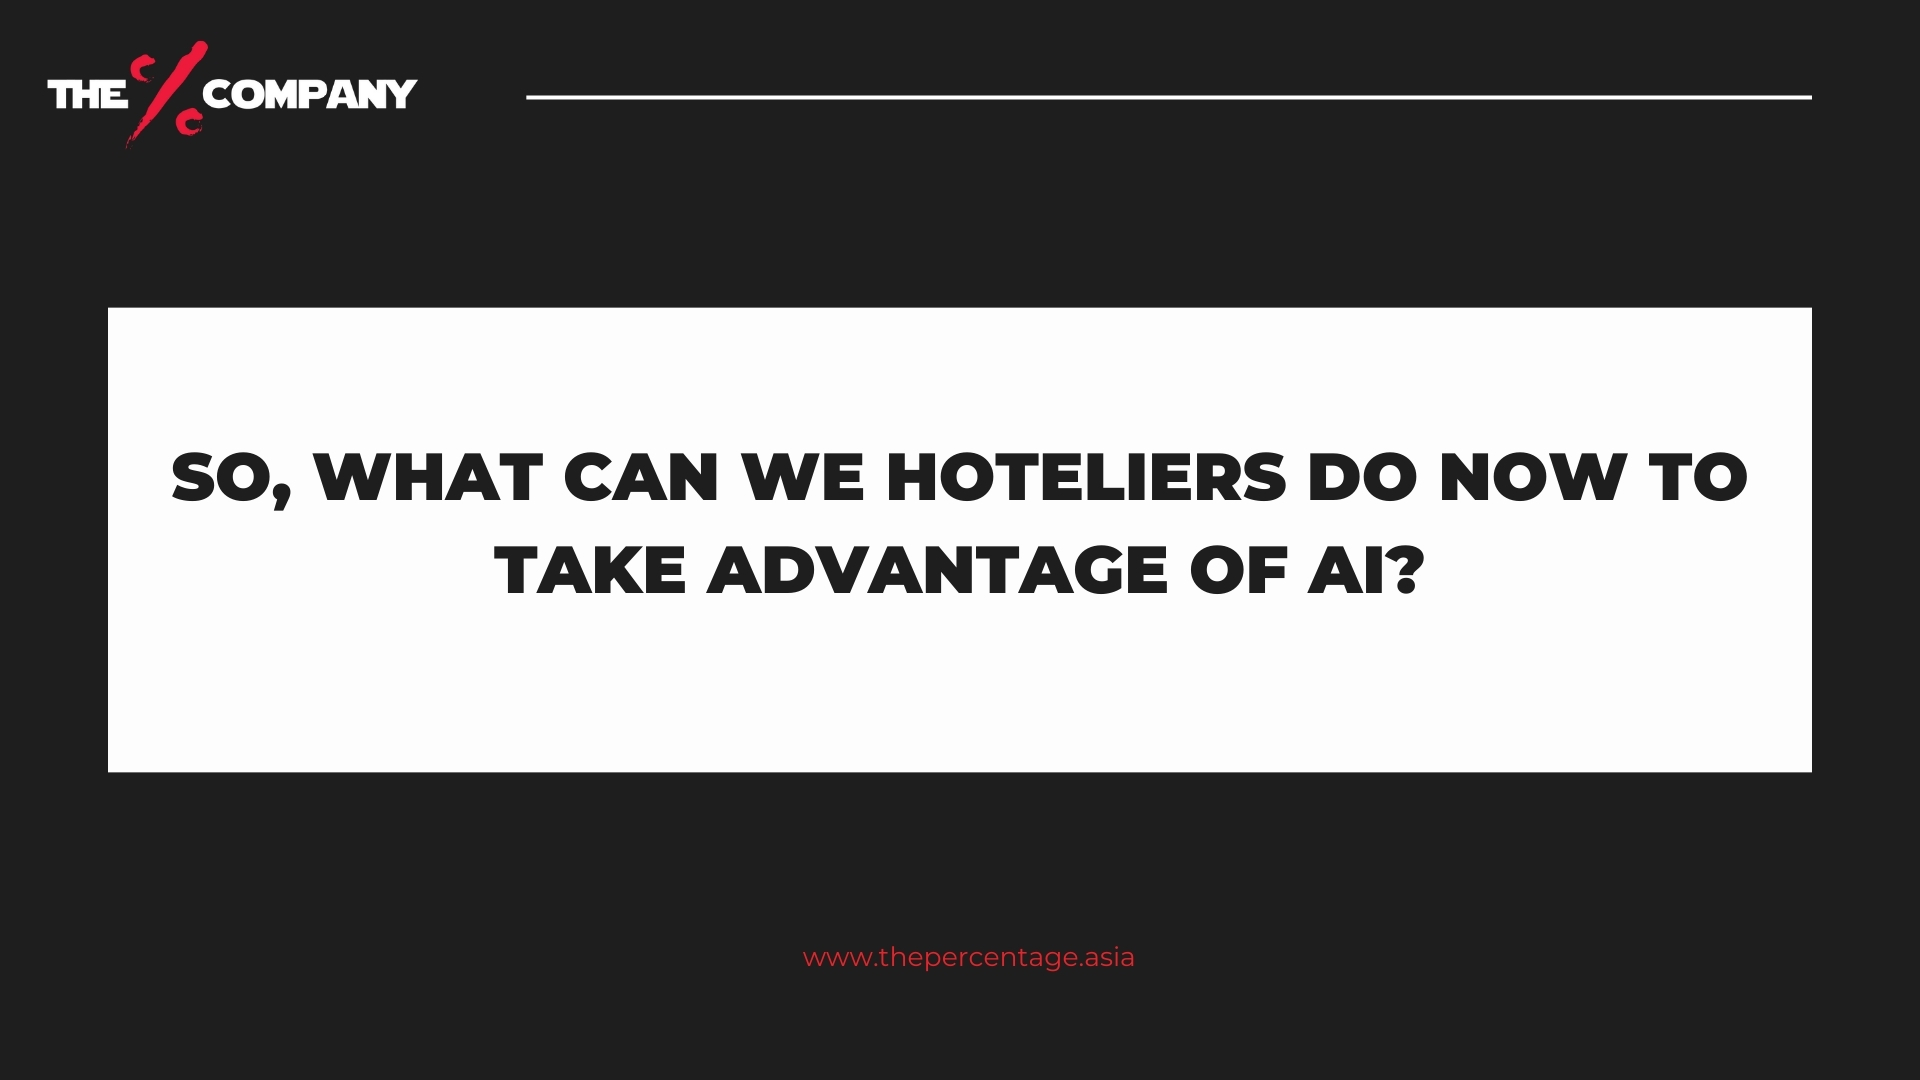 Advantage of AI to hoteliers